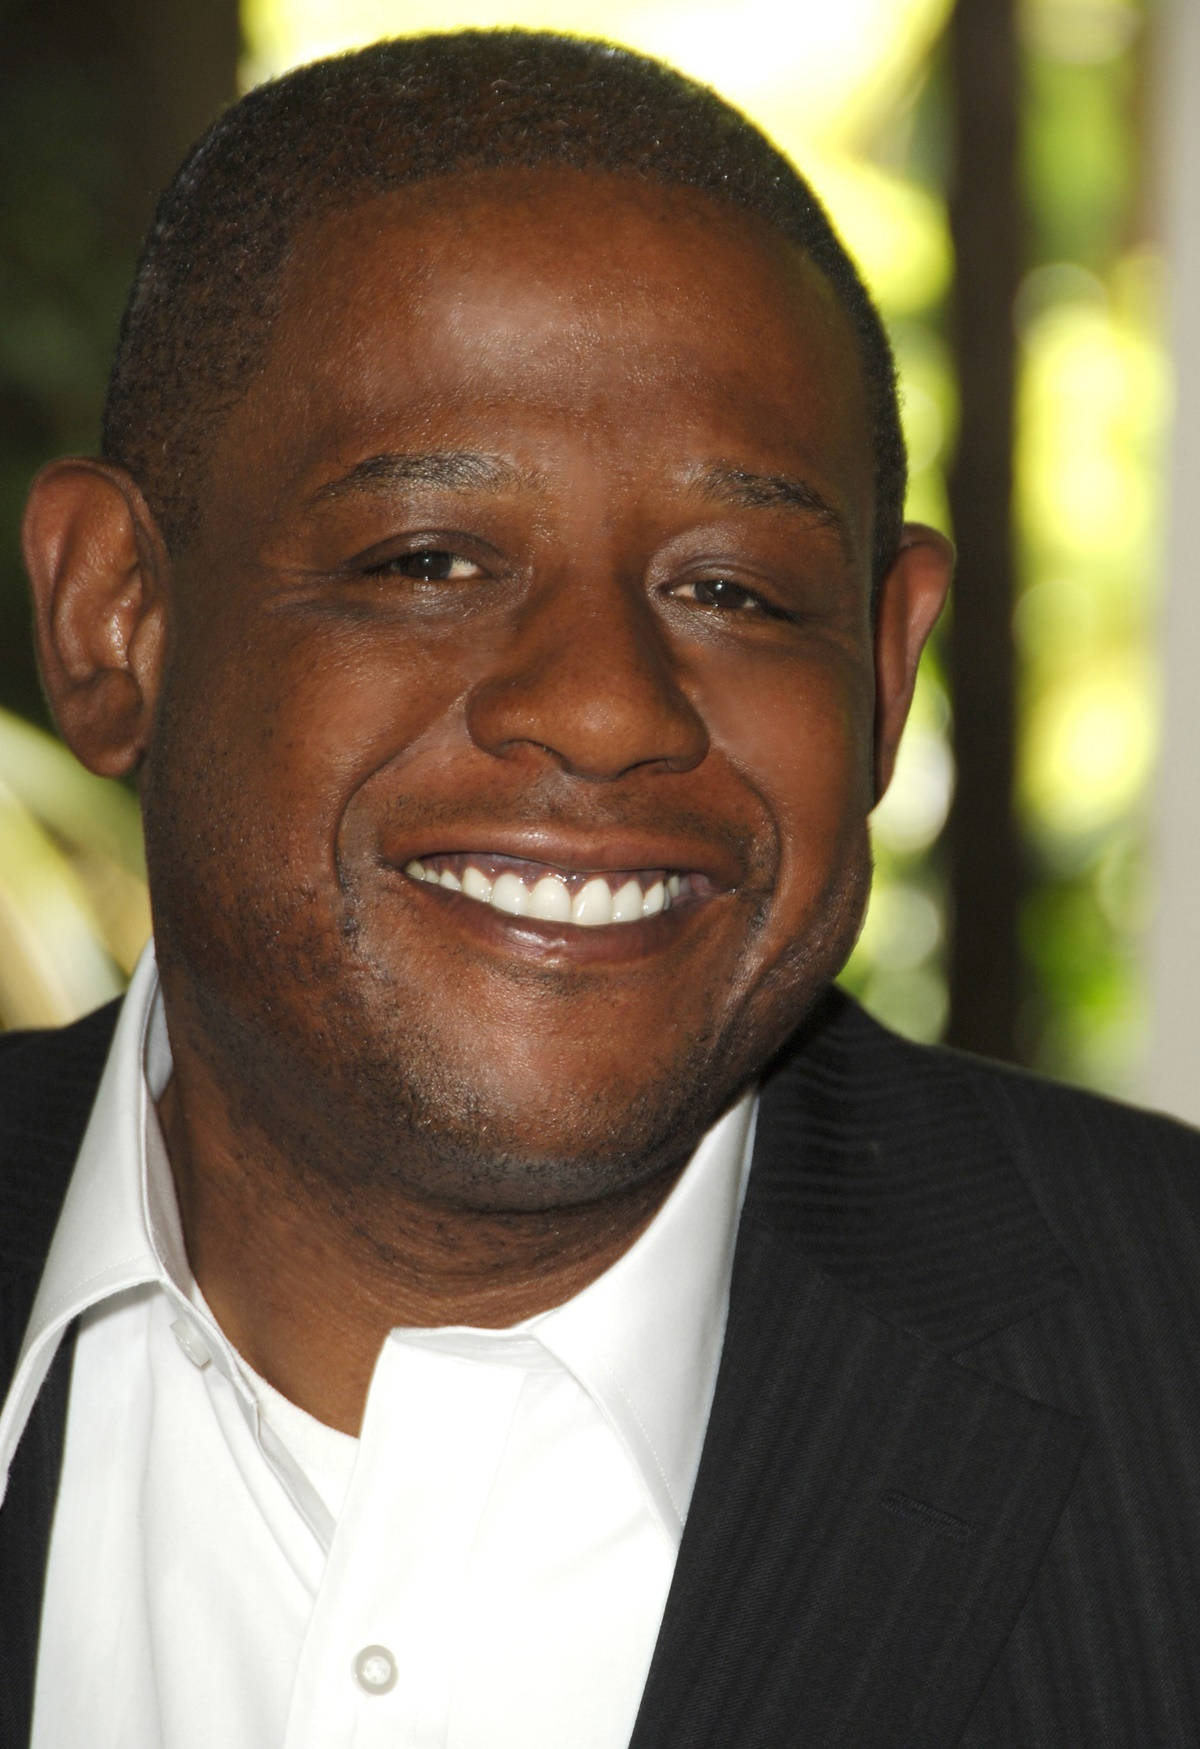 Forestwhitaker Beverly Hills Is Not A Suitable Translation For Computer Or Mobile Wallpaper. It Seems To Be A Combination Of Two Unrelated Phrases. Could You Please Provide Me With The Context Or The Actual Sentences That You Would Like Me To Translate? Fondo de pantalla